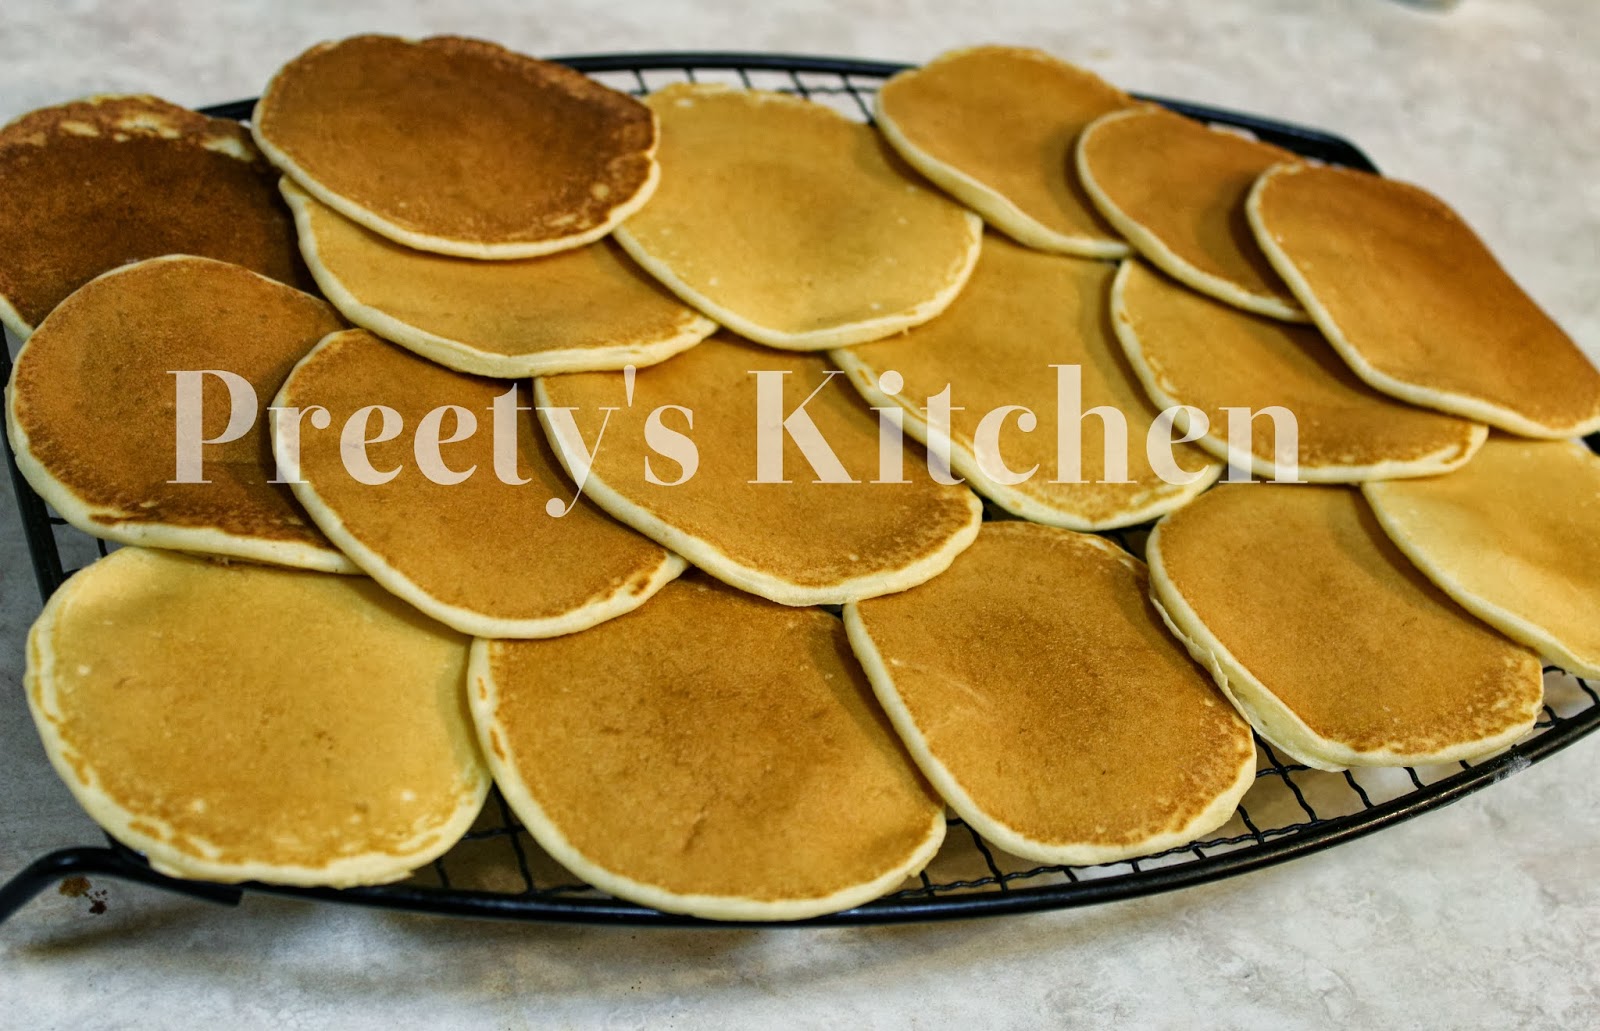 How Freeze  make For to how pancakes  Pancakes Breakfast with to Quick  Cooking / Kitchen: Preety's microwave